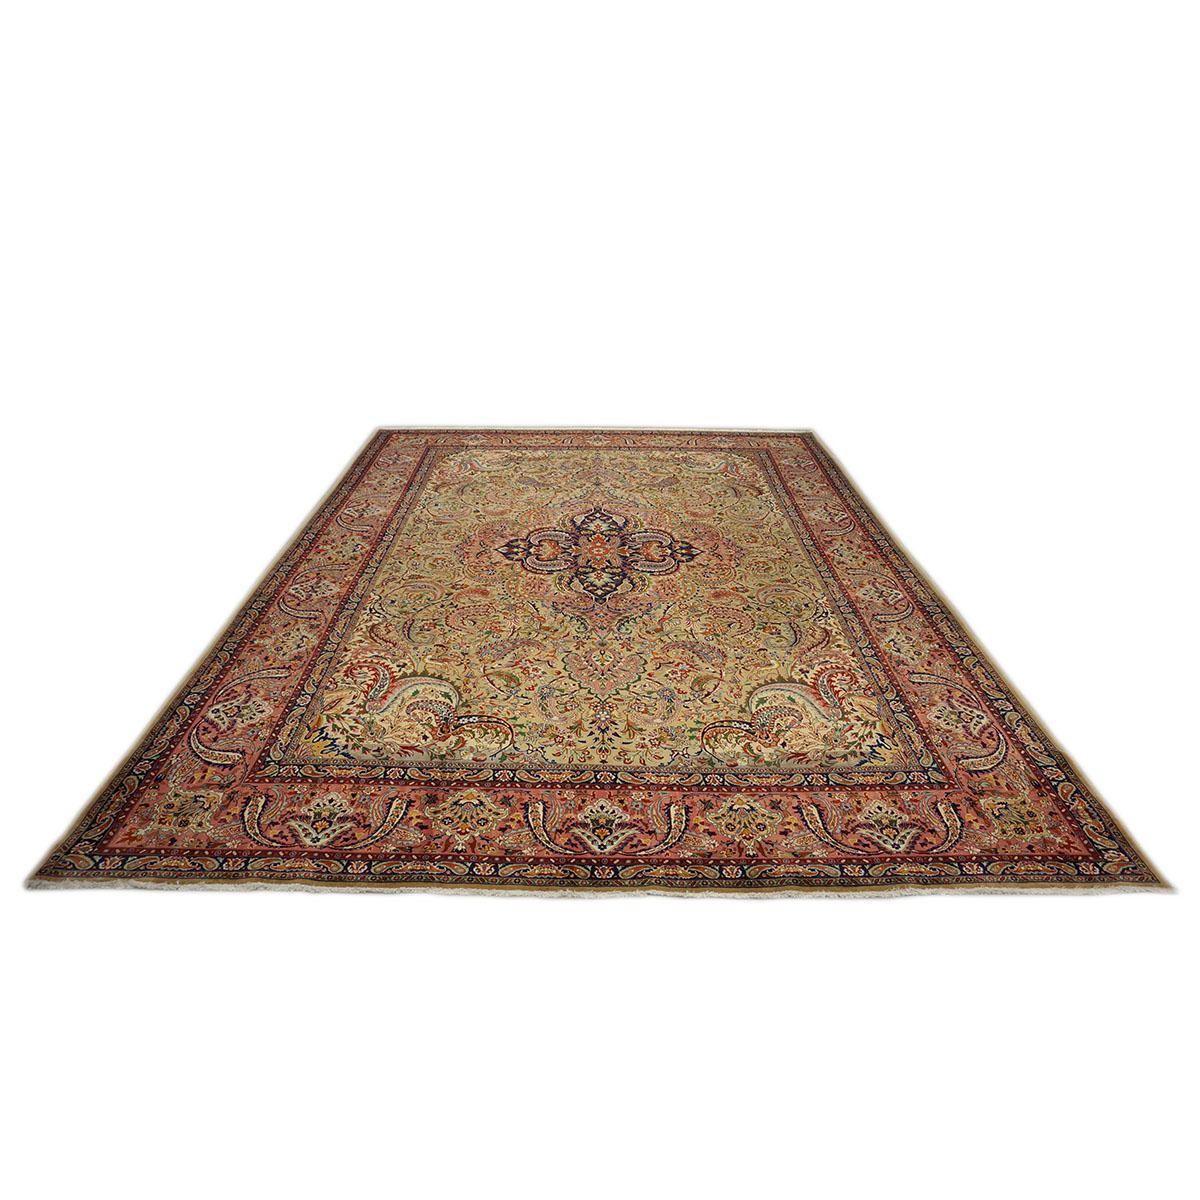 Ashly Fine Rugs presents a 1930s Antique Persian Tabriz. Tabriz is a northern city in modern-day Iran and has forever been famous for the fineness and craftsmanship of its handmade rugs. These rugs are better known as the Pahlavi Dynasty rugs, as